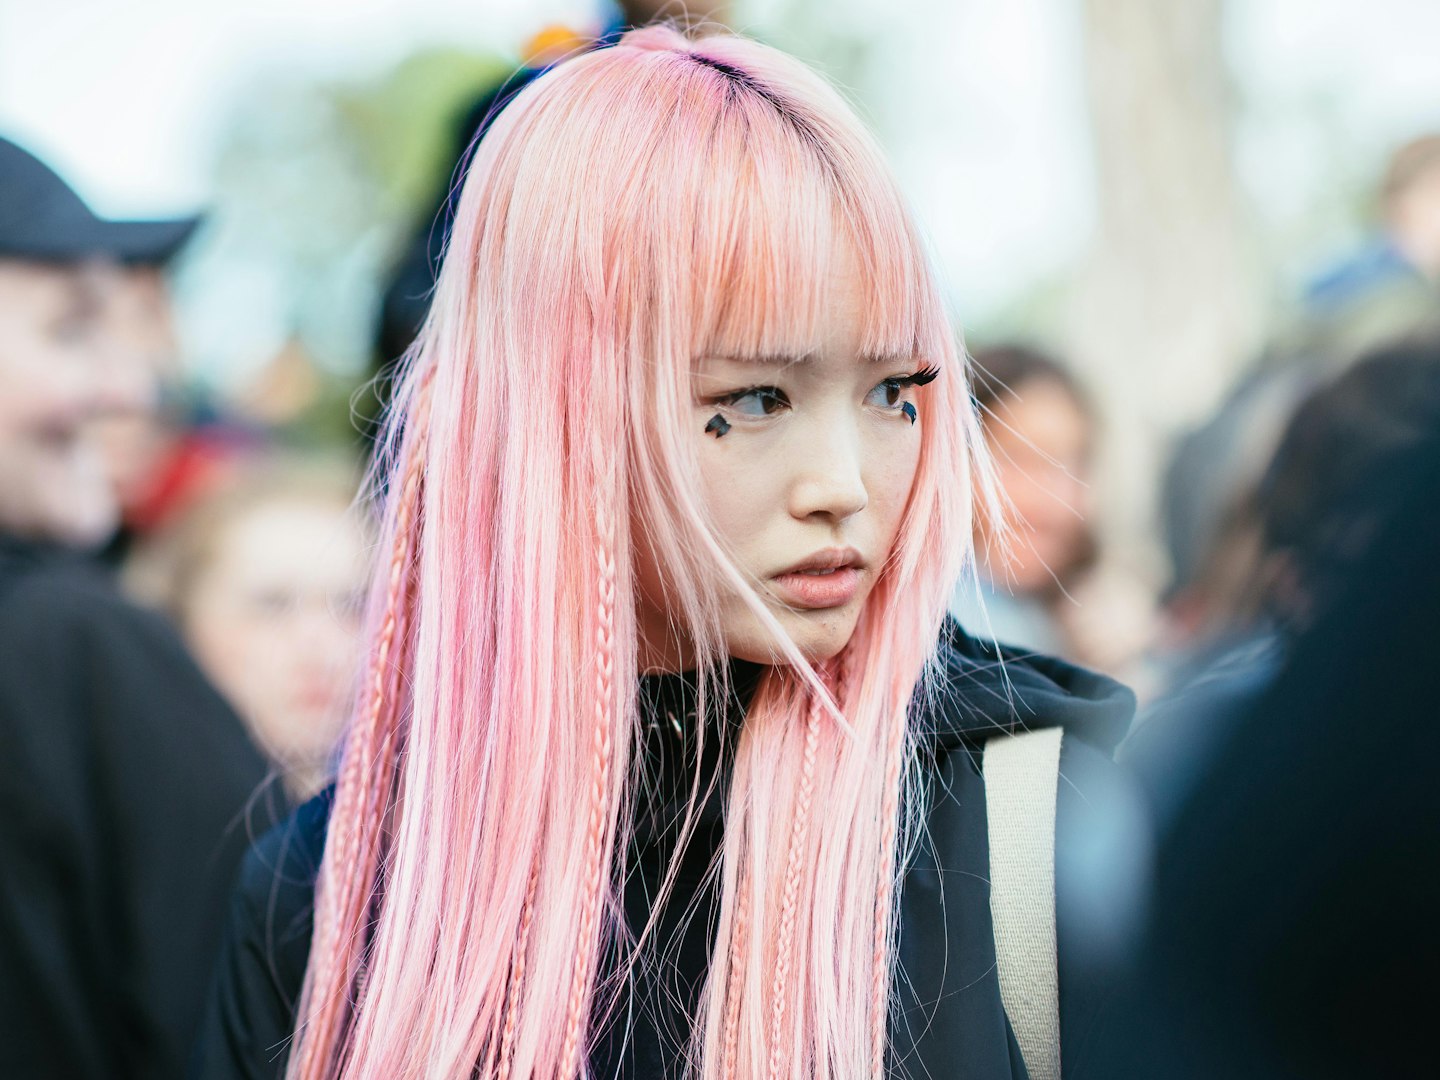 From Millennial Pink To Blushing Blonde, Here's How To Achieve The